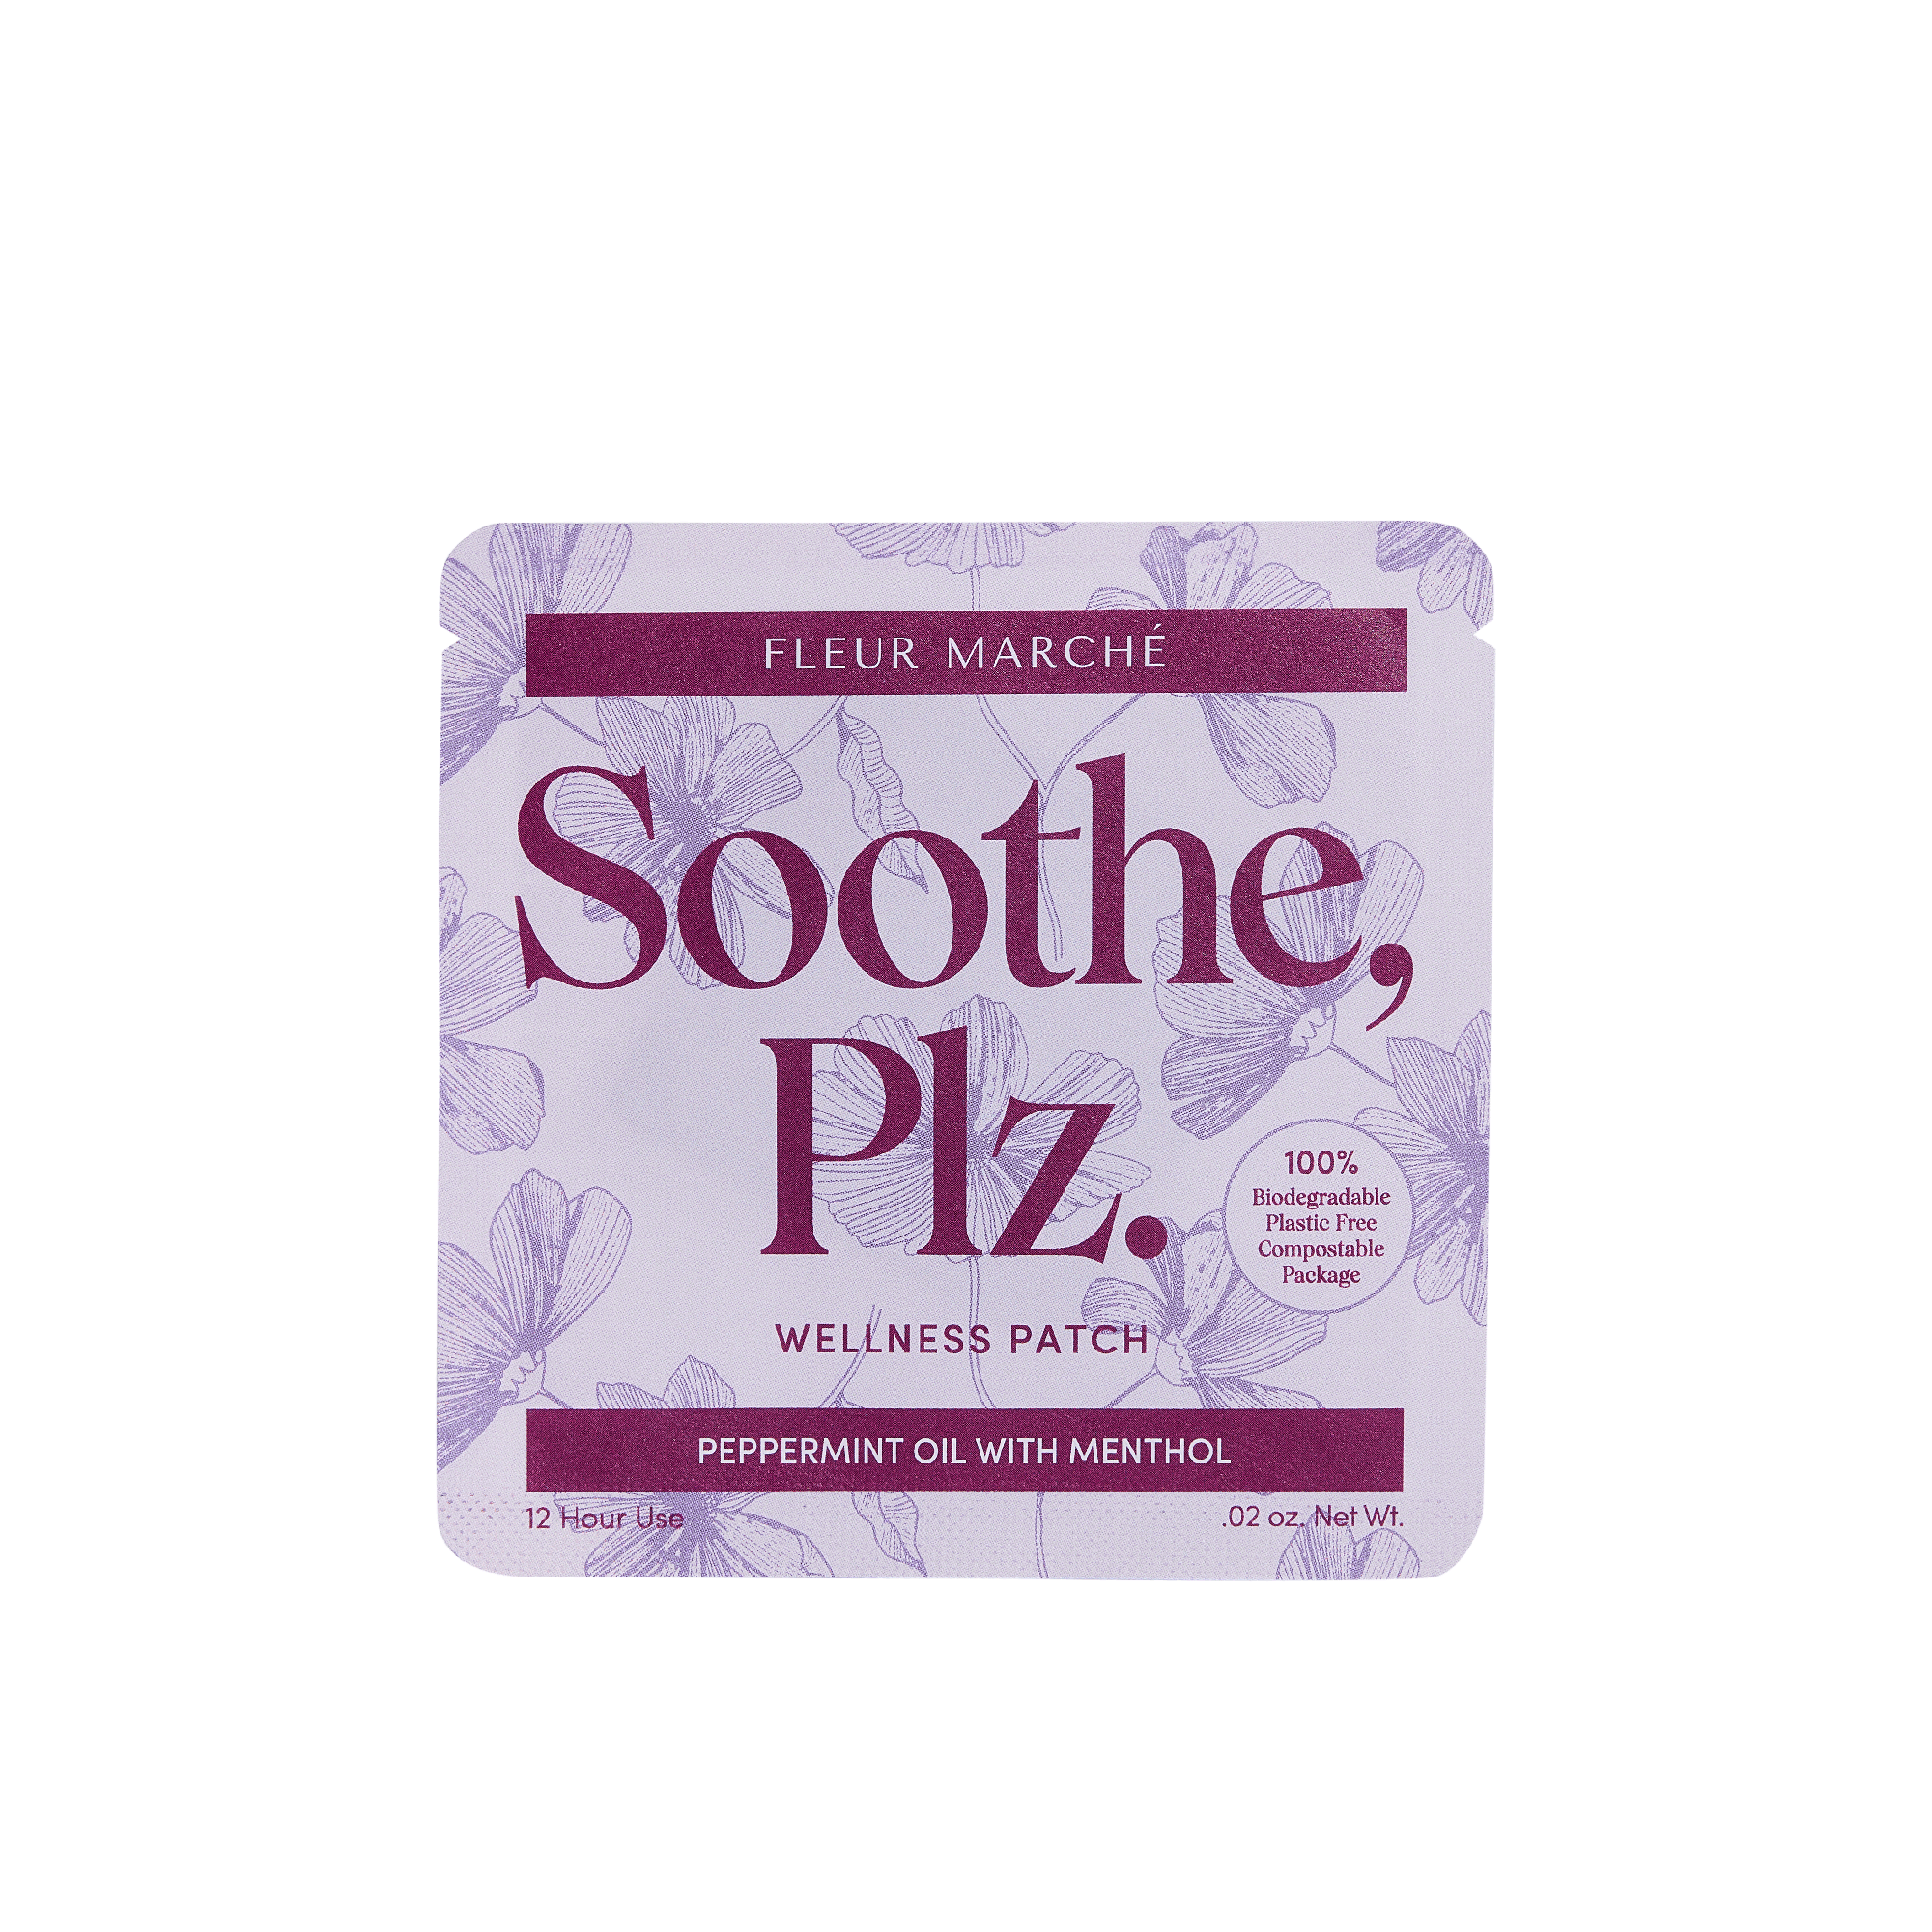 Wholesale Soothe, Plz. 50 Count + Tower